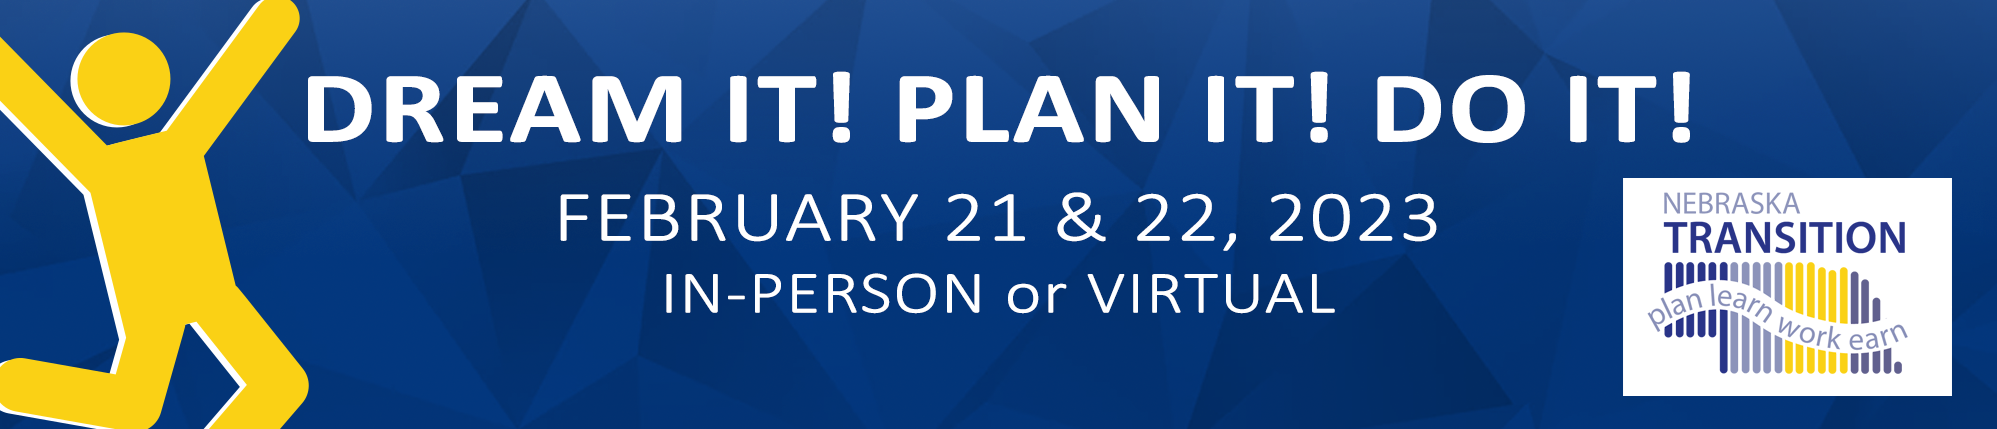 Dream It! Plan It! Do It! February 21 & 22, 2023 In-Person or Virtual